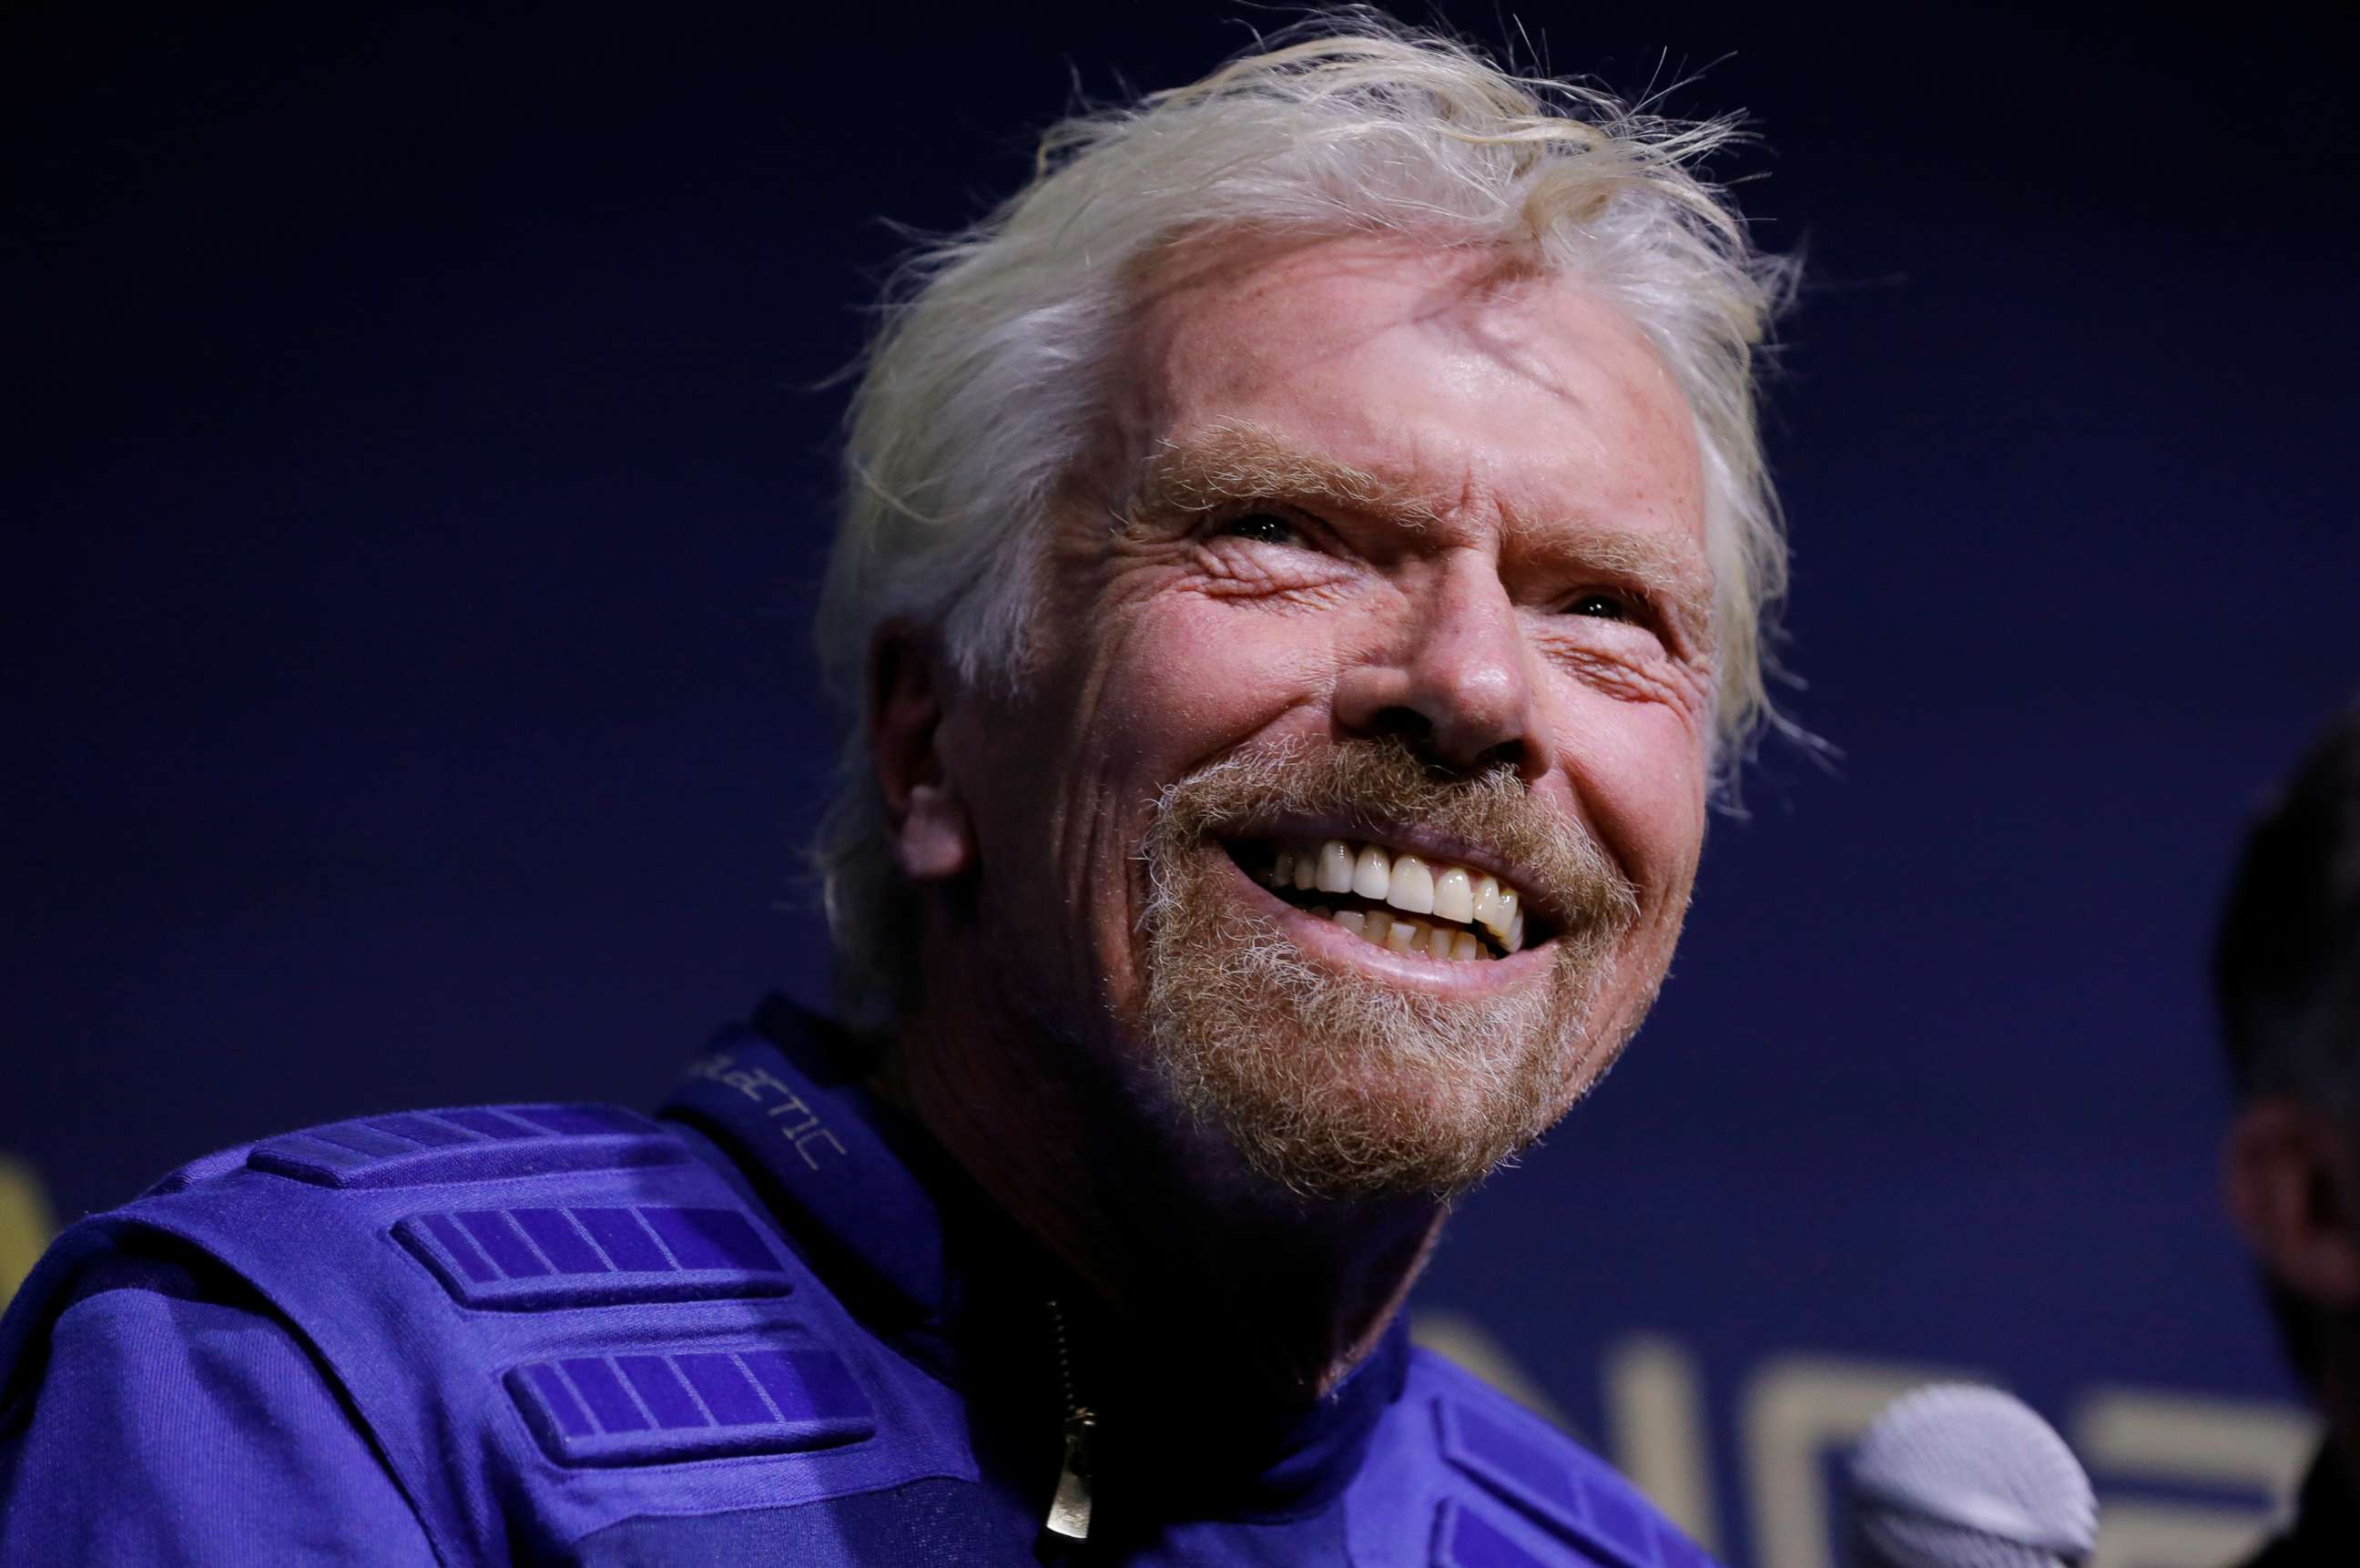 What is Richard Branson's net worth, how old is he, when did he